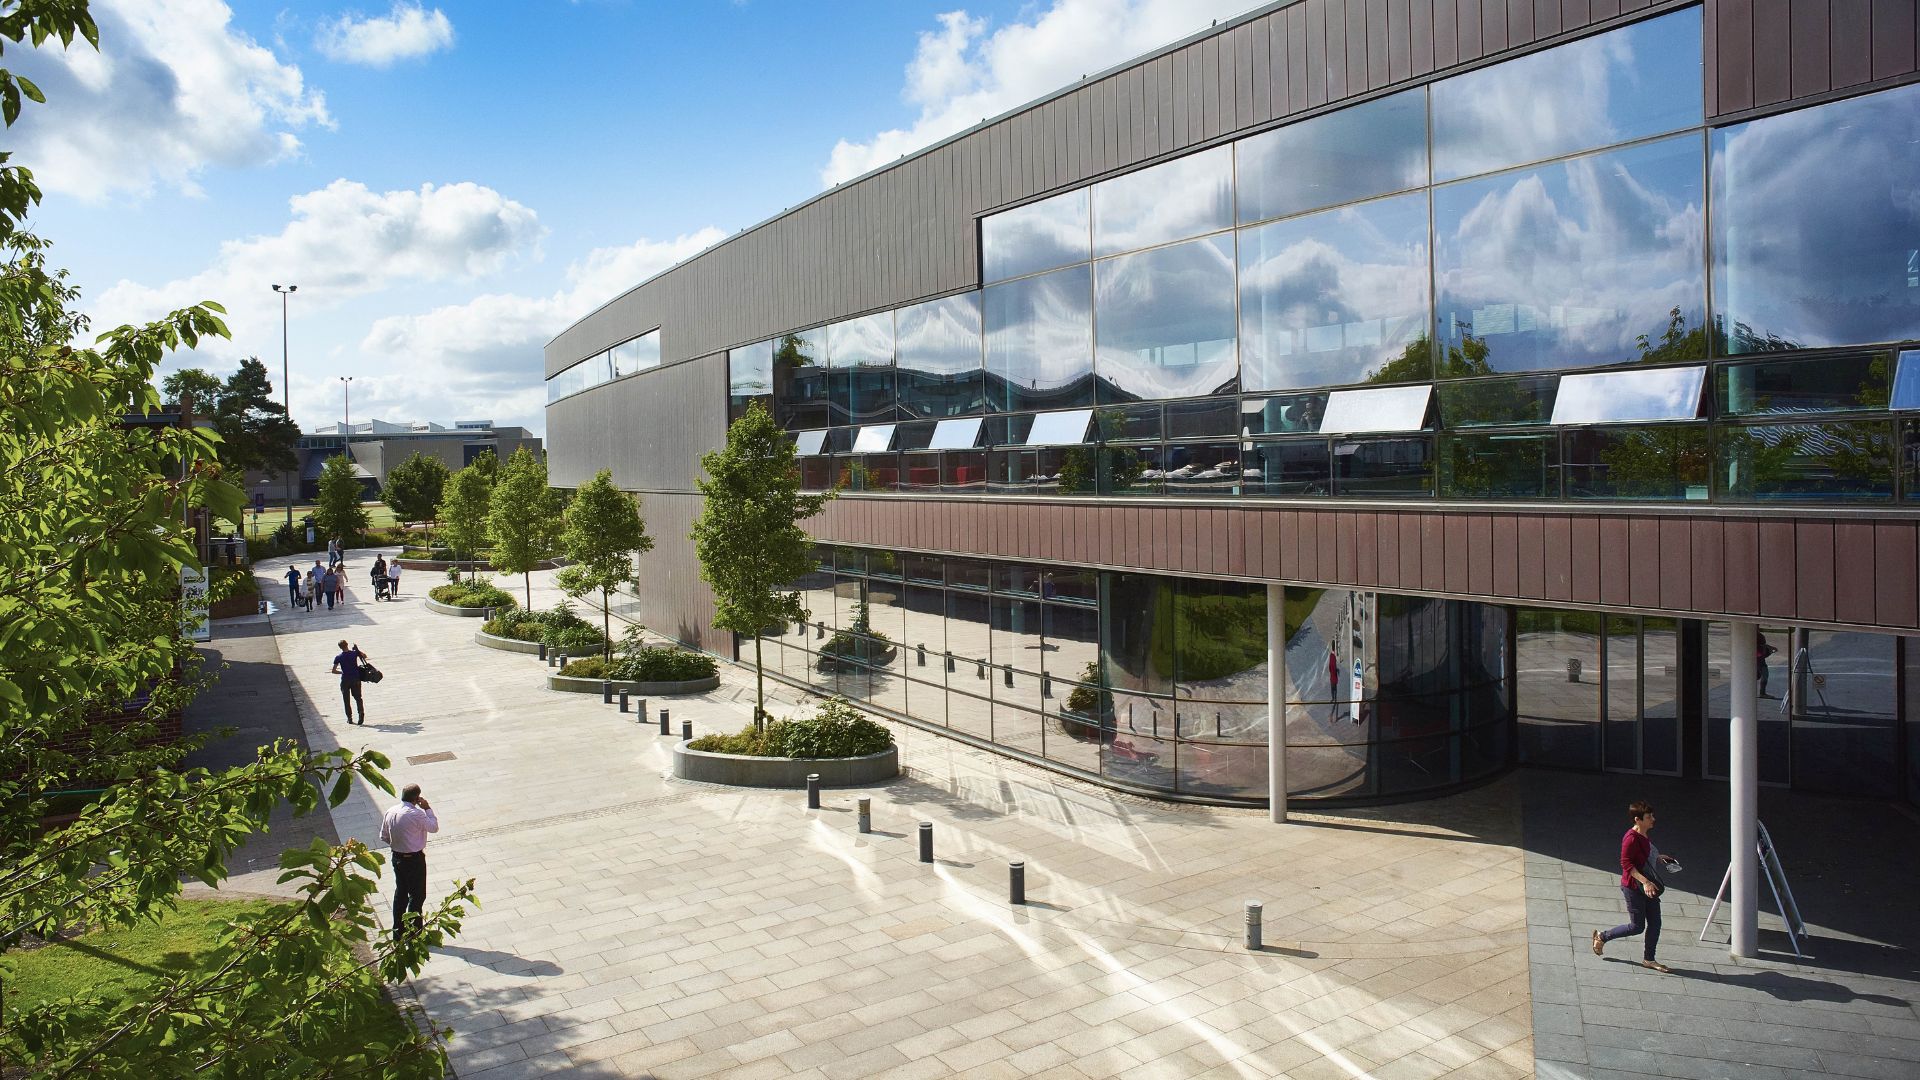 exterior shot of campus showing the hub